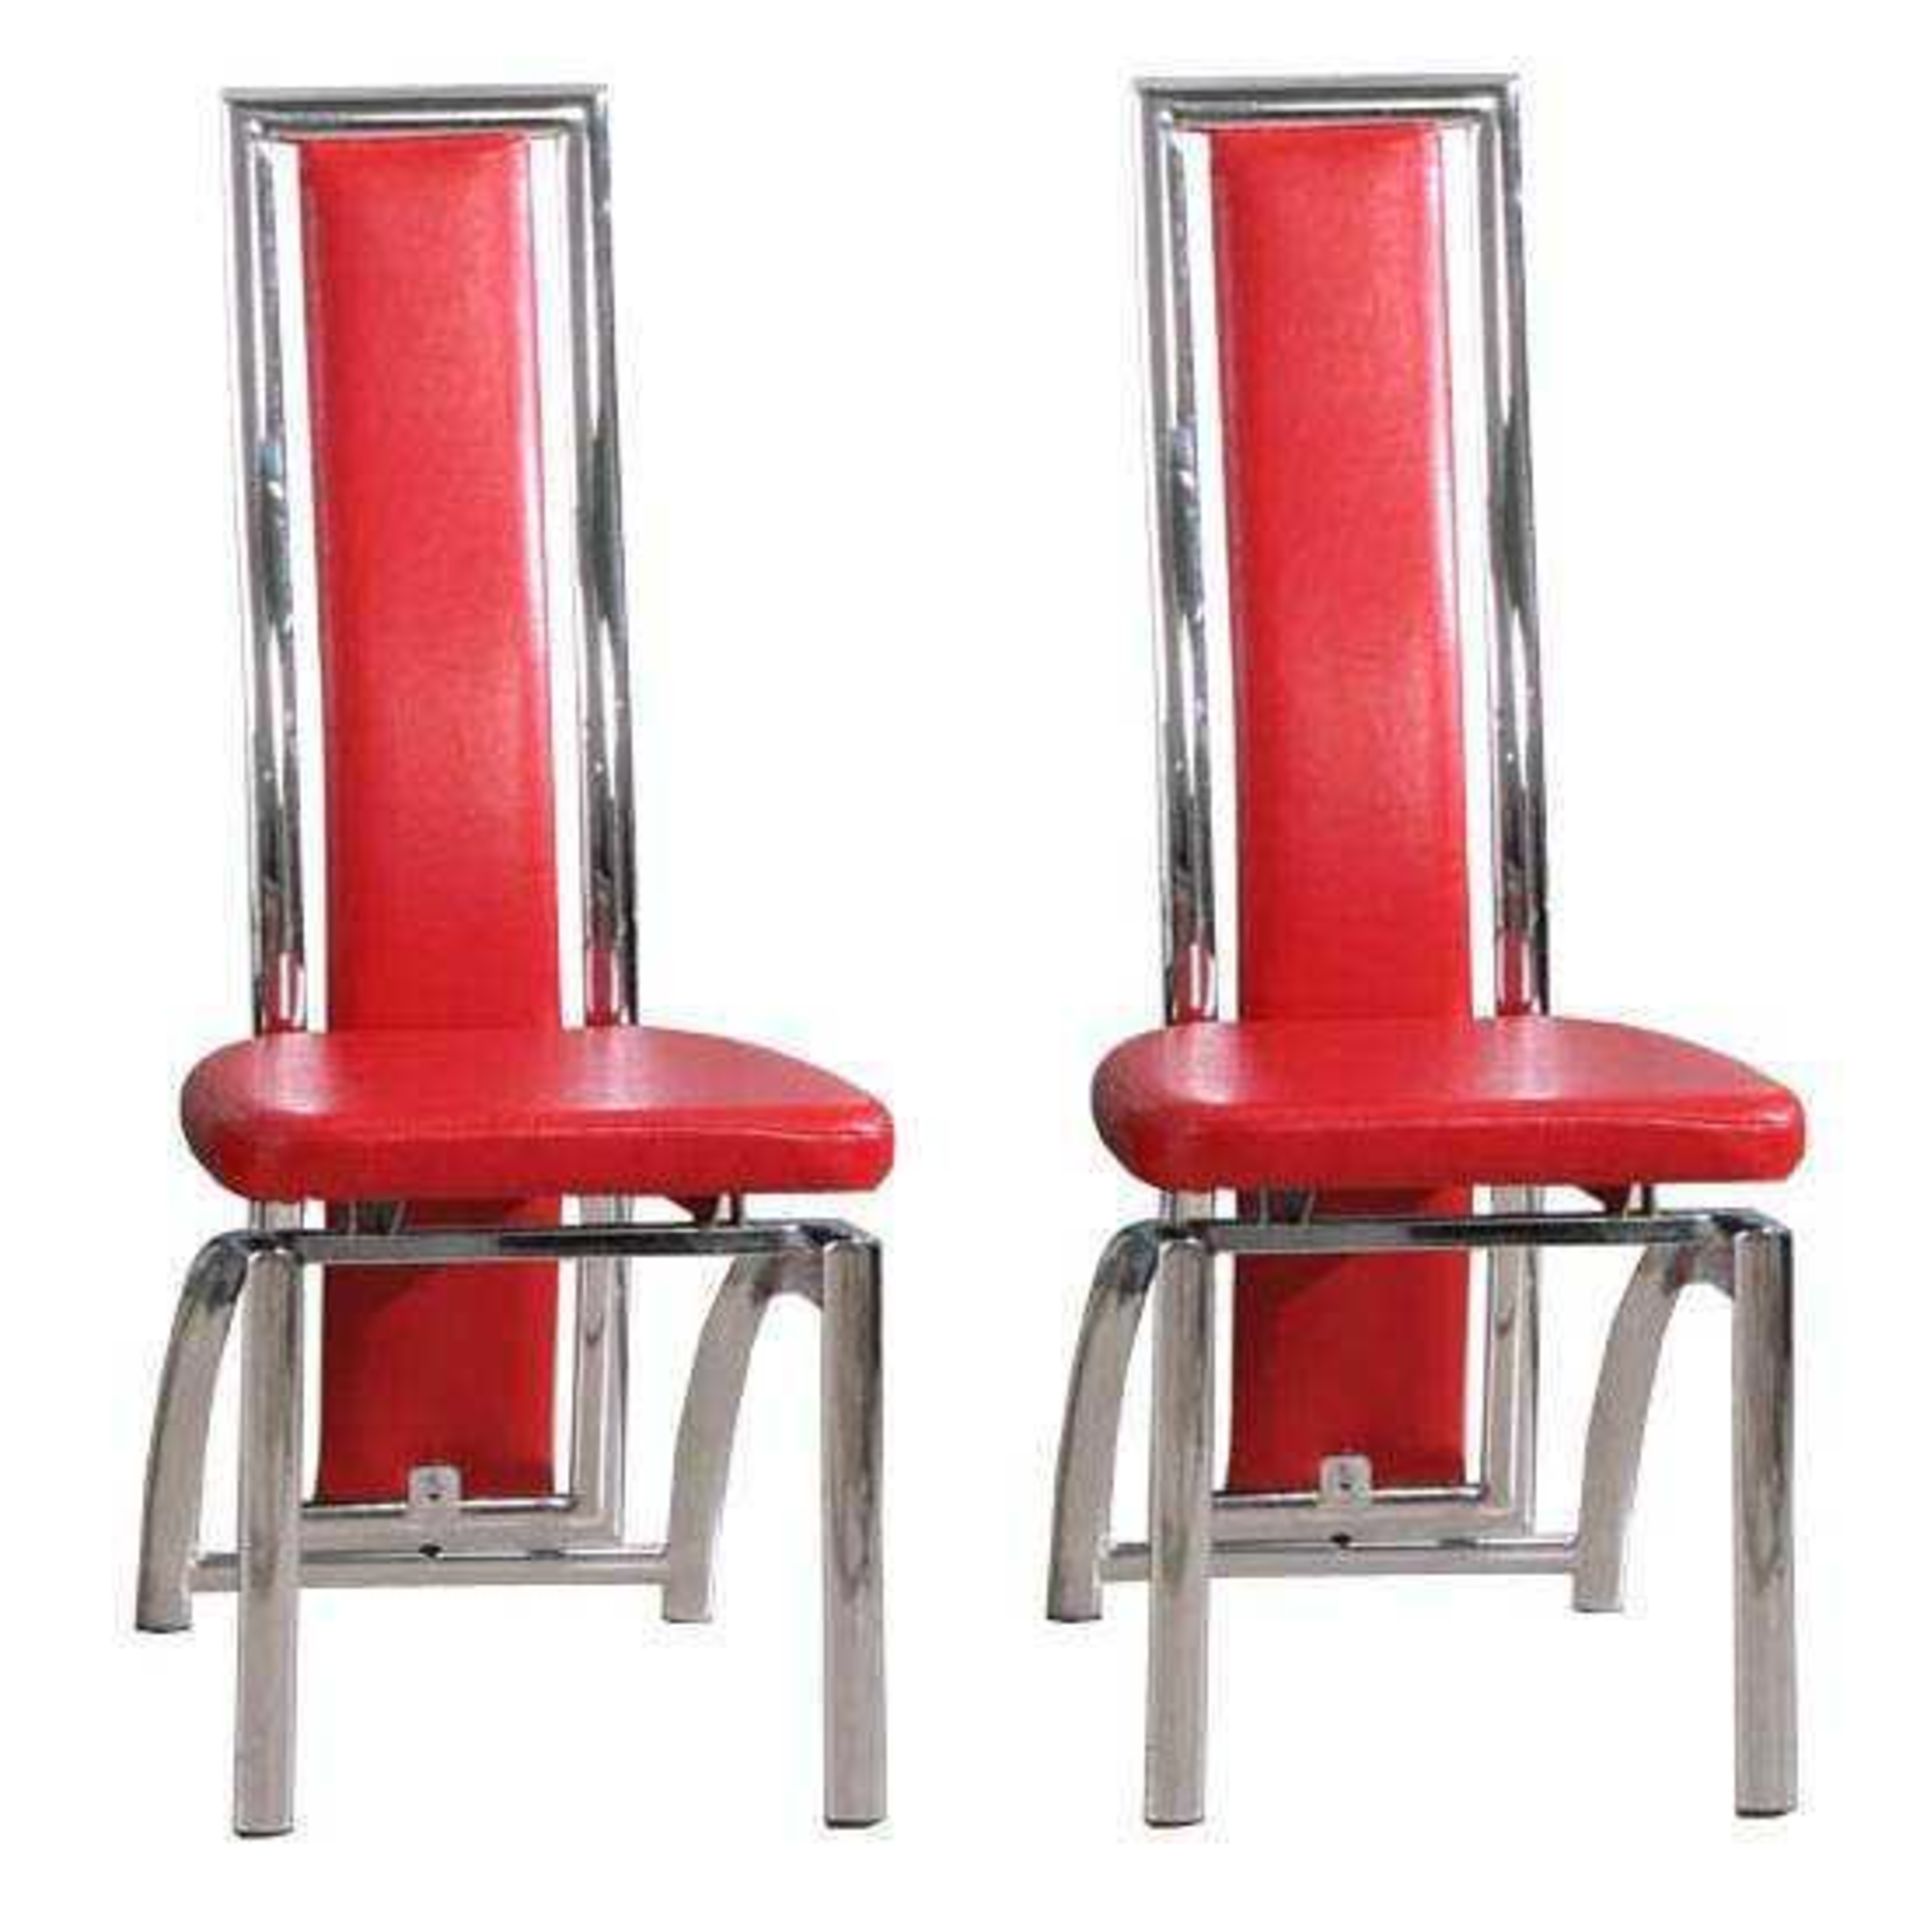 Rrp £300 Boxed Pair Of Chicago Red Designer Dining Chairs With Chrome Trim